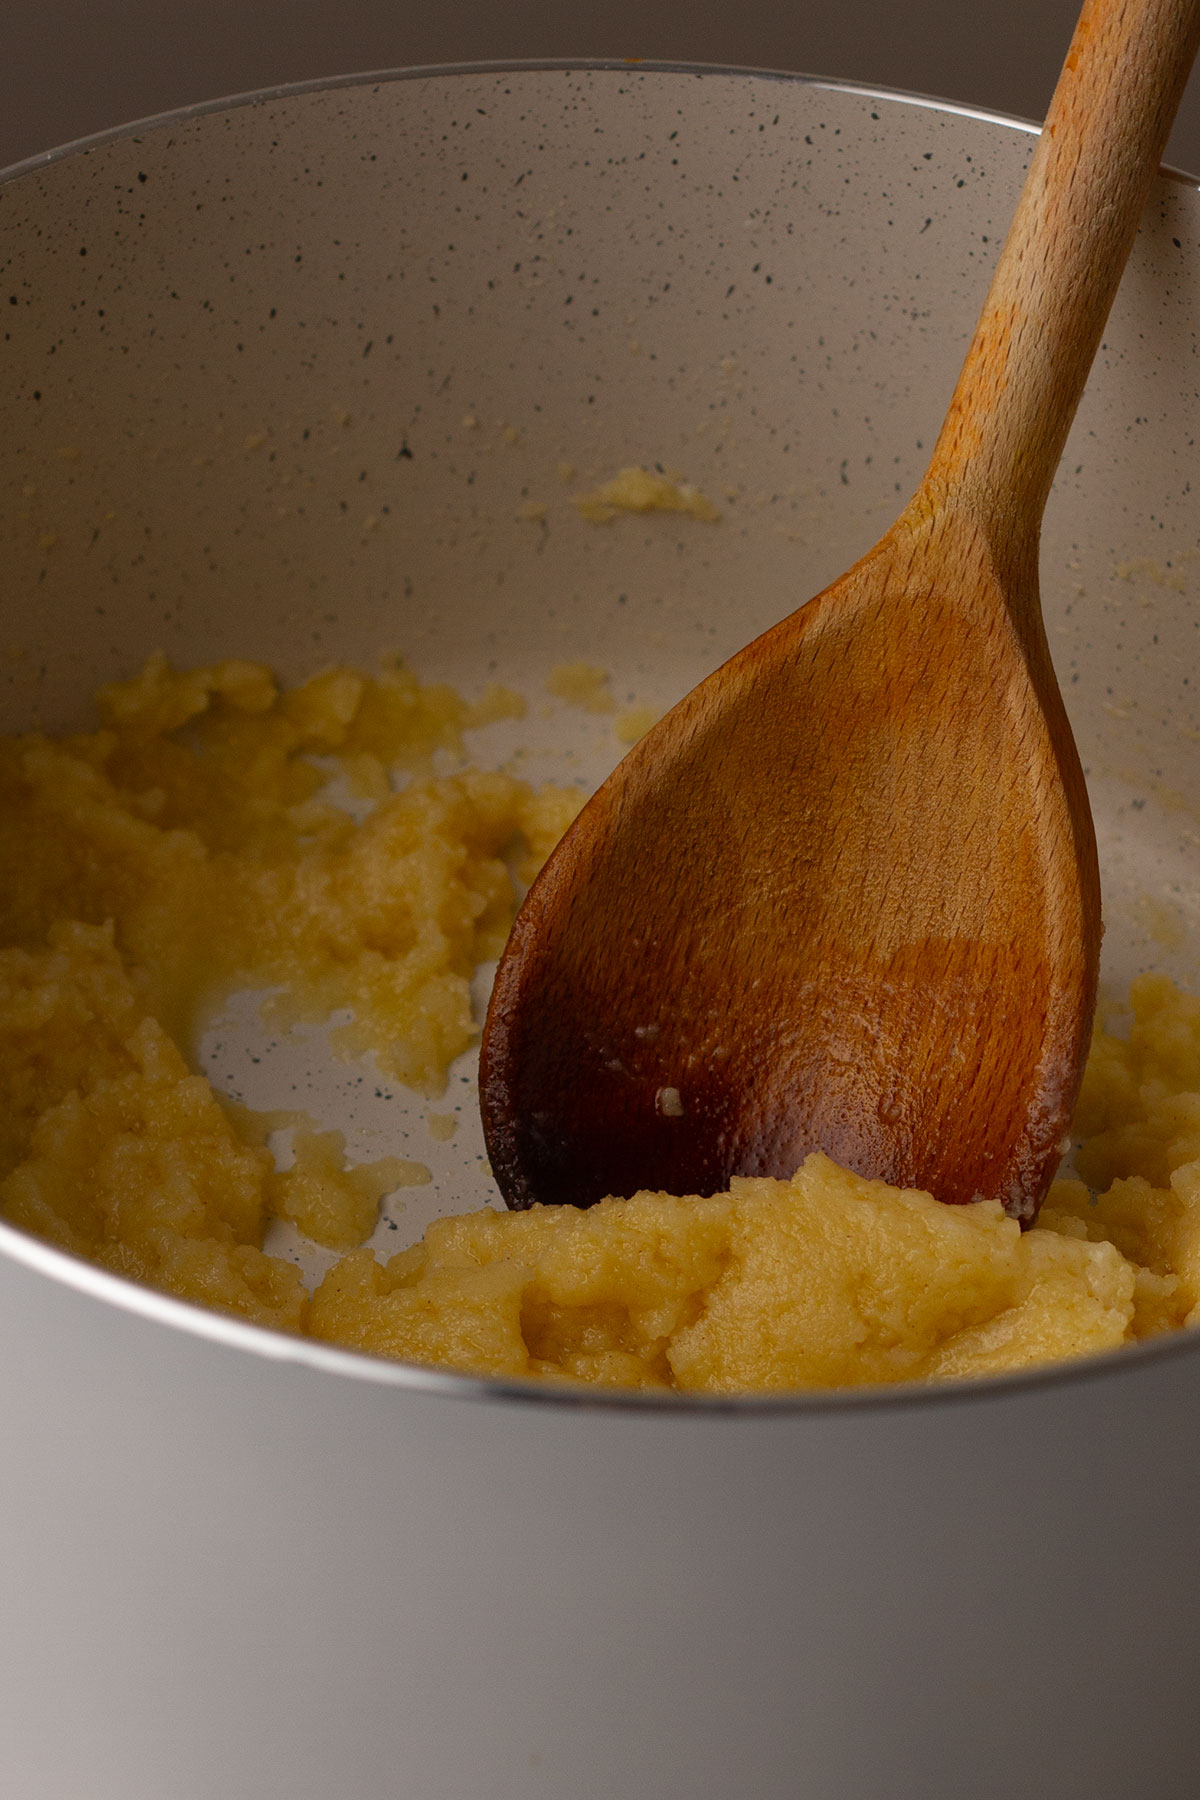 Melting the butter and adding flour and mixing with a wooden spoon to form a smooth paste.